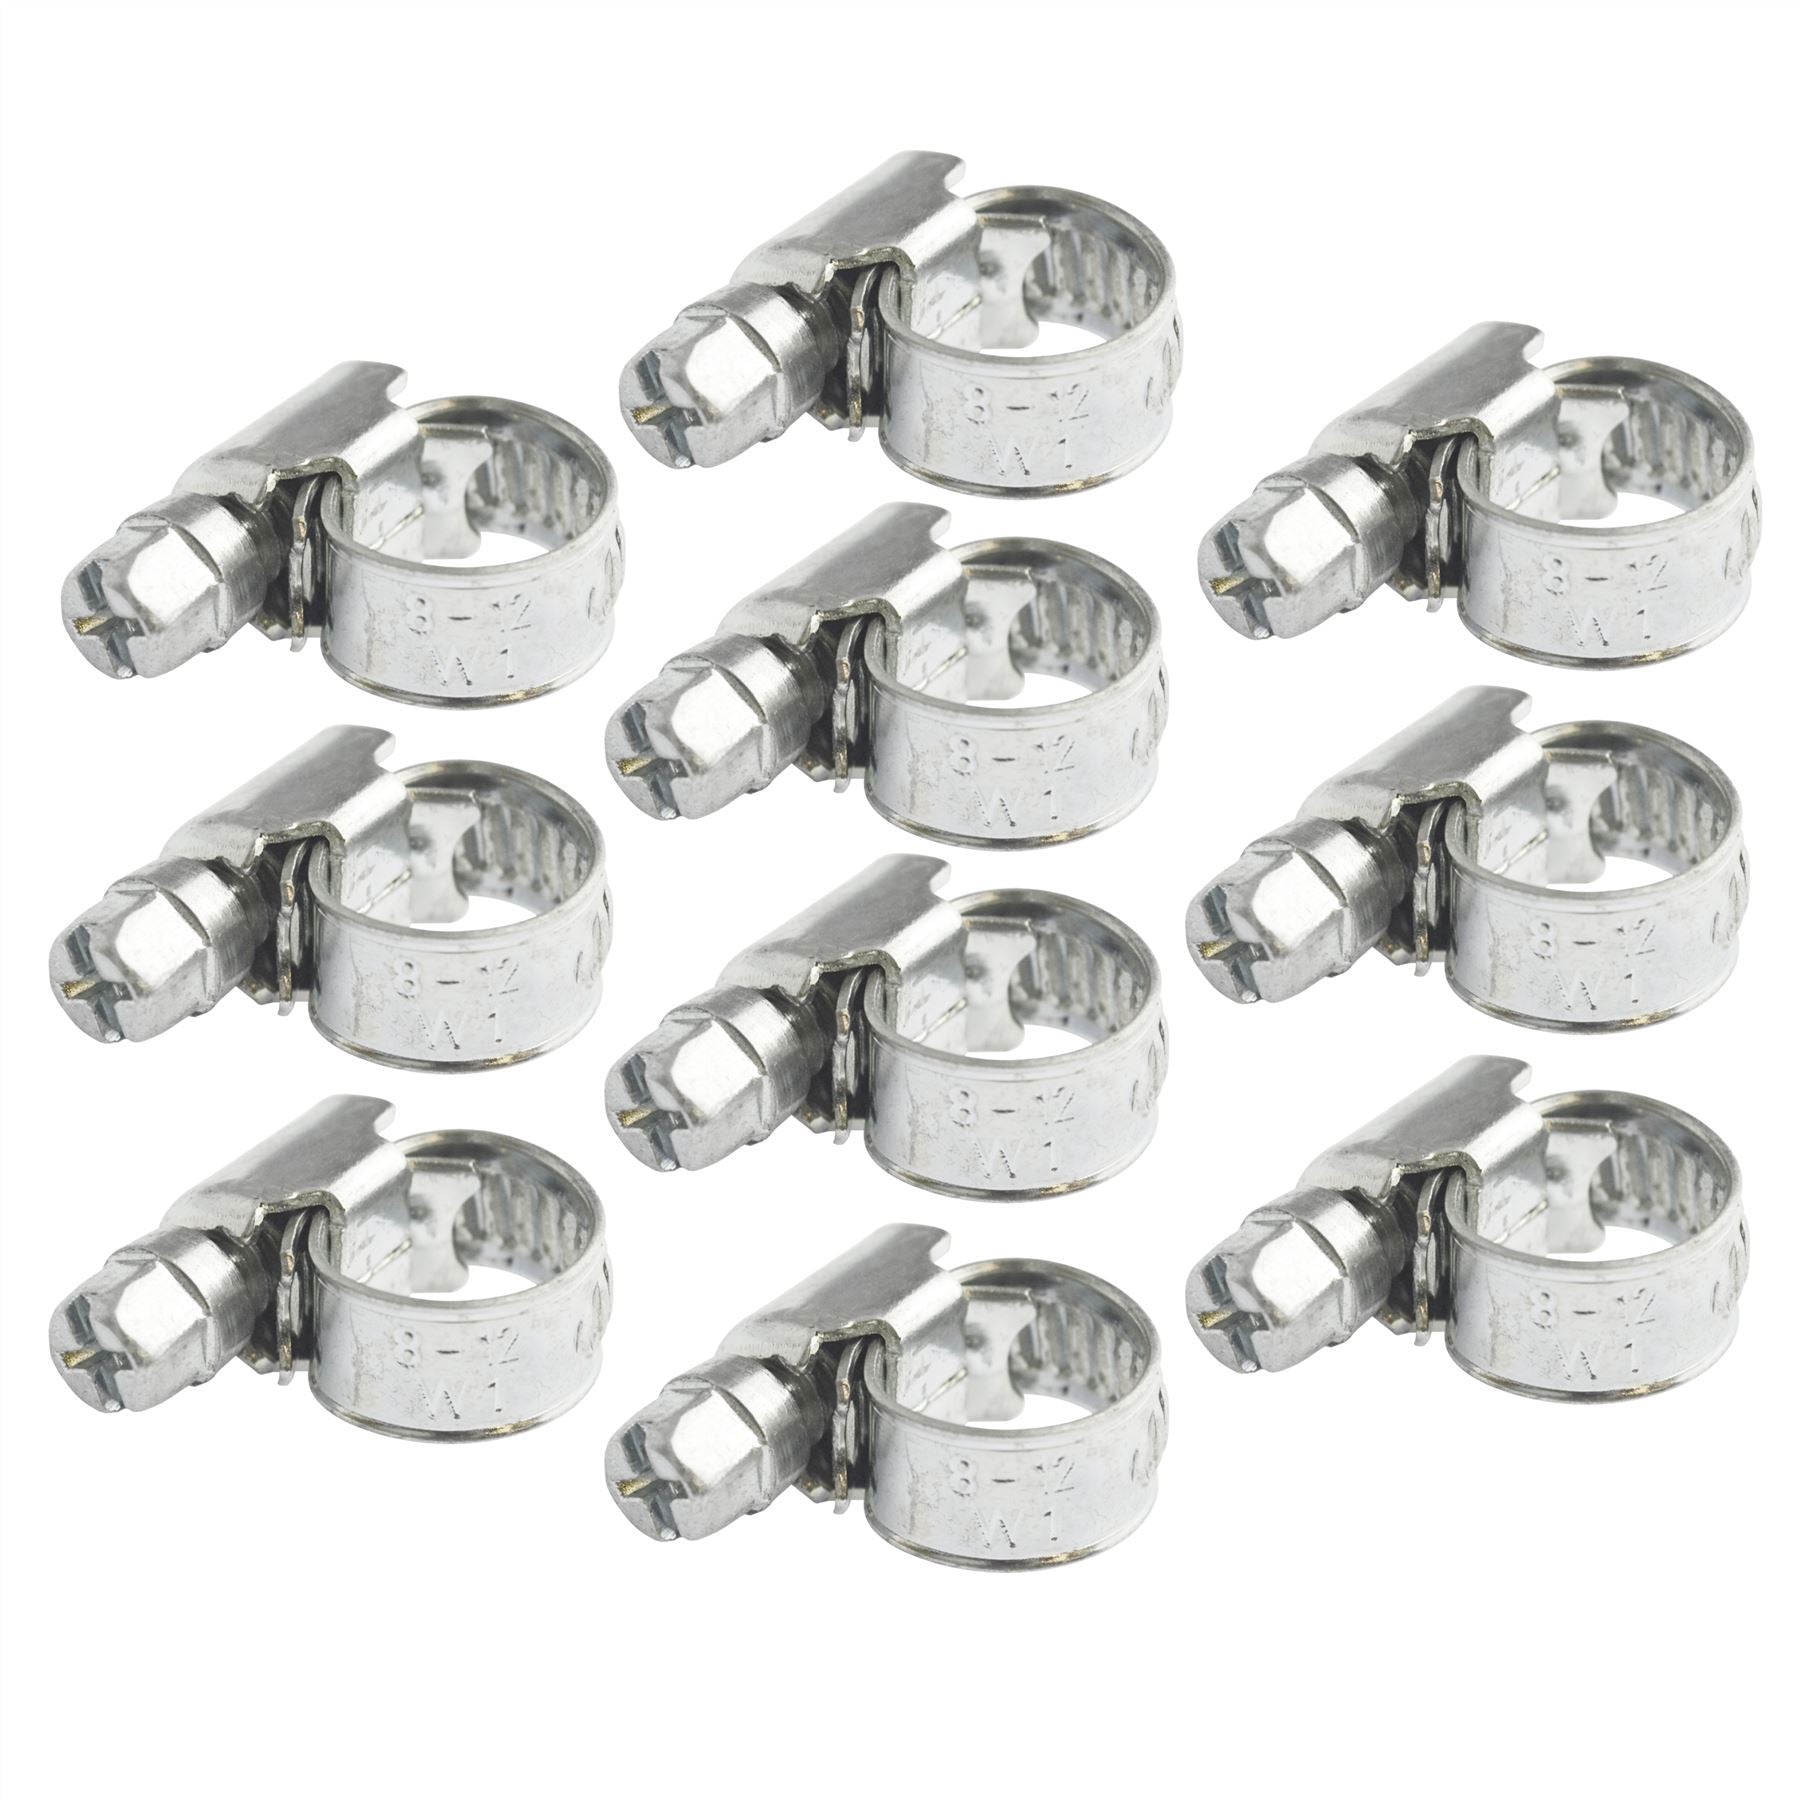 Jubilee Hose Pipe Clamps / Clips For Air Water Fuel Gas 8mm - 12mm 10 Pack AT740